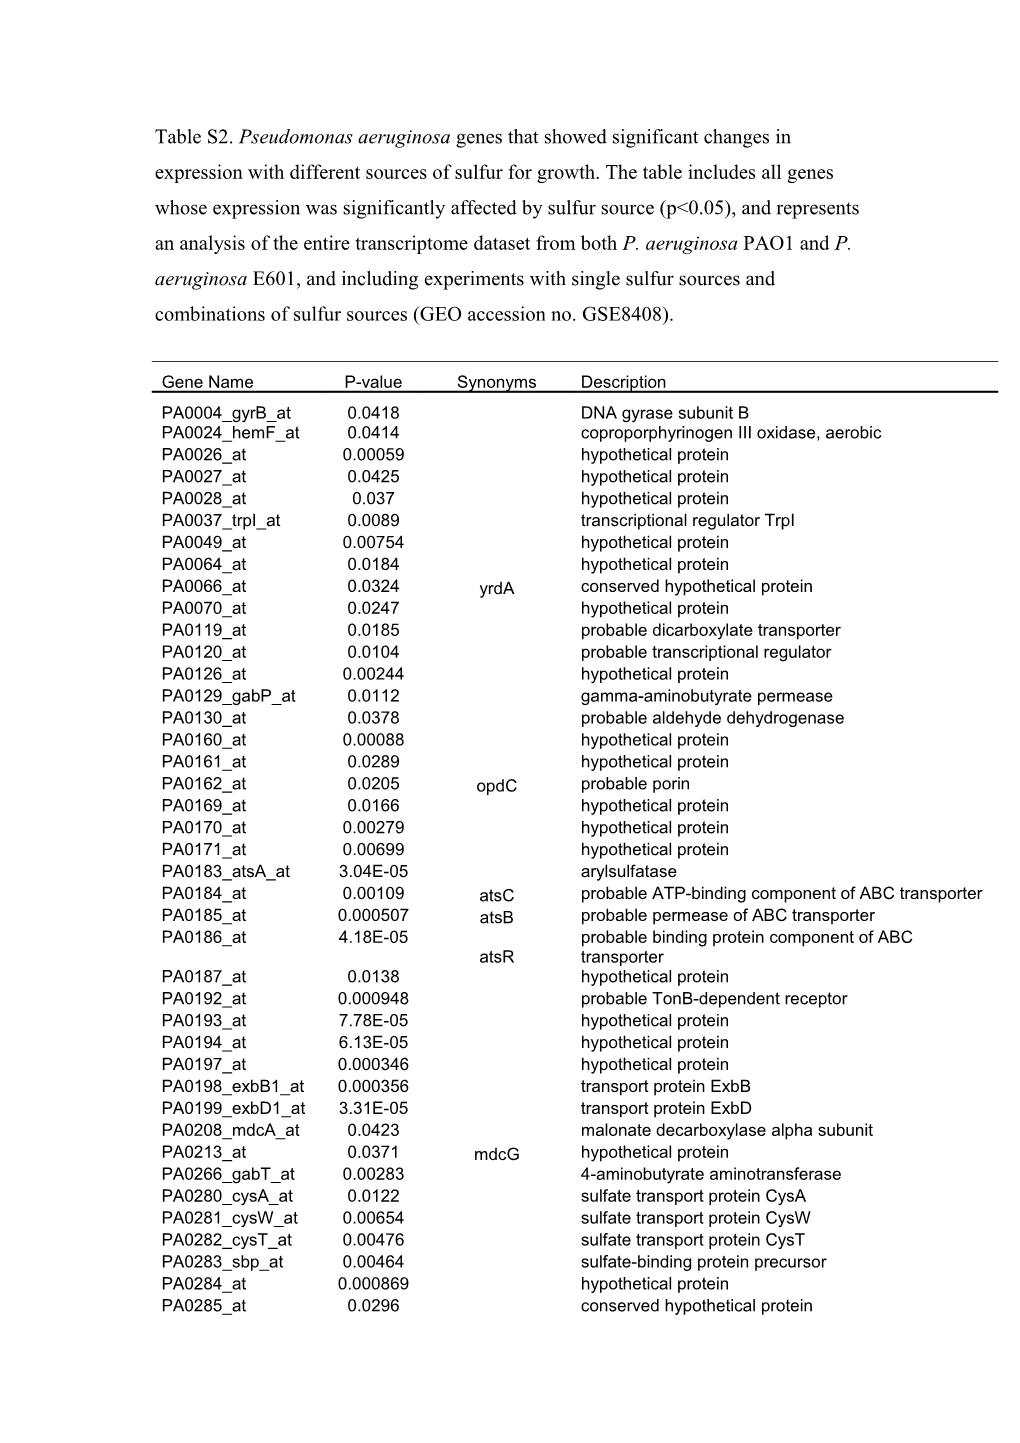 Table S2. Pseudomonas Aeruginosa Genes That Showed Significant Changes in Expression With